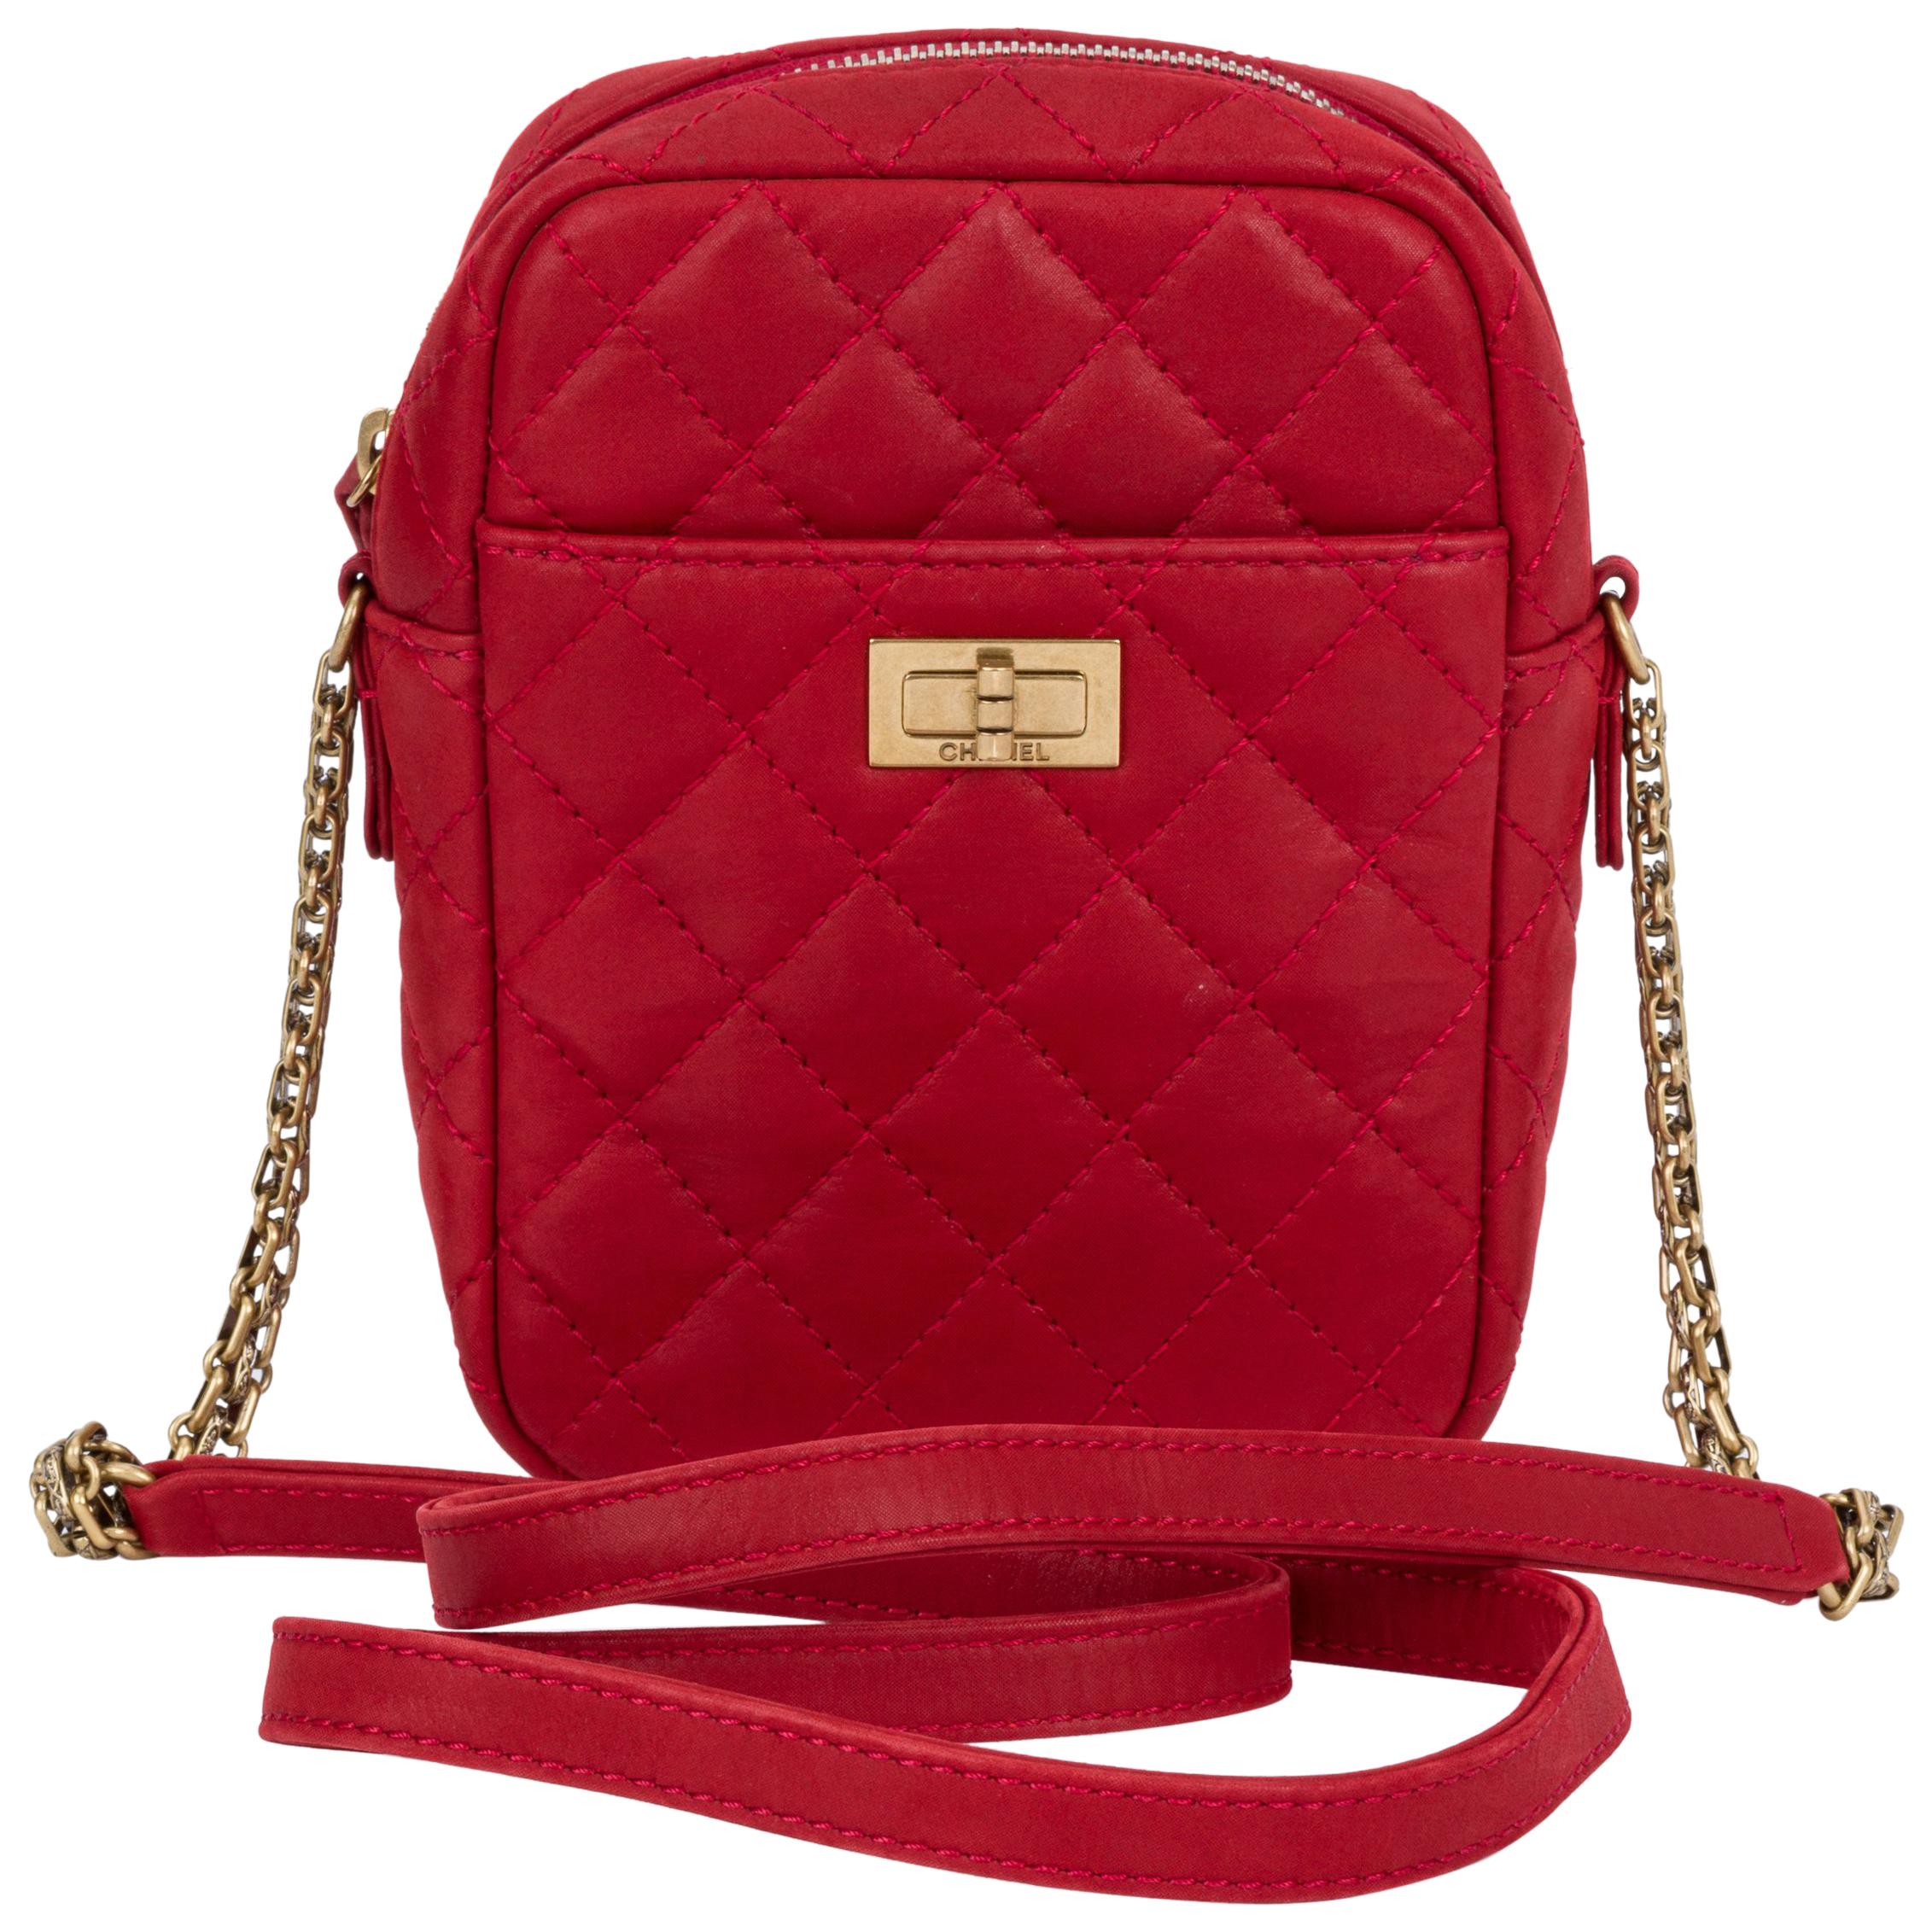 New Chanel Red Quilted Leather Reissue Crossbody Bag